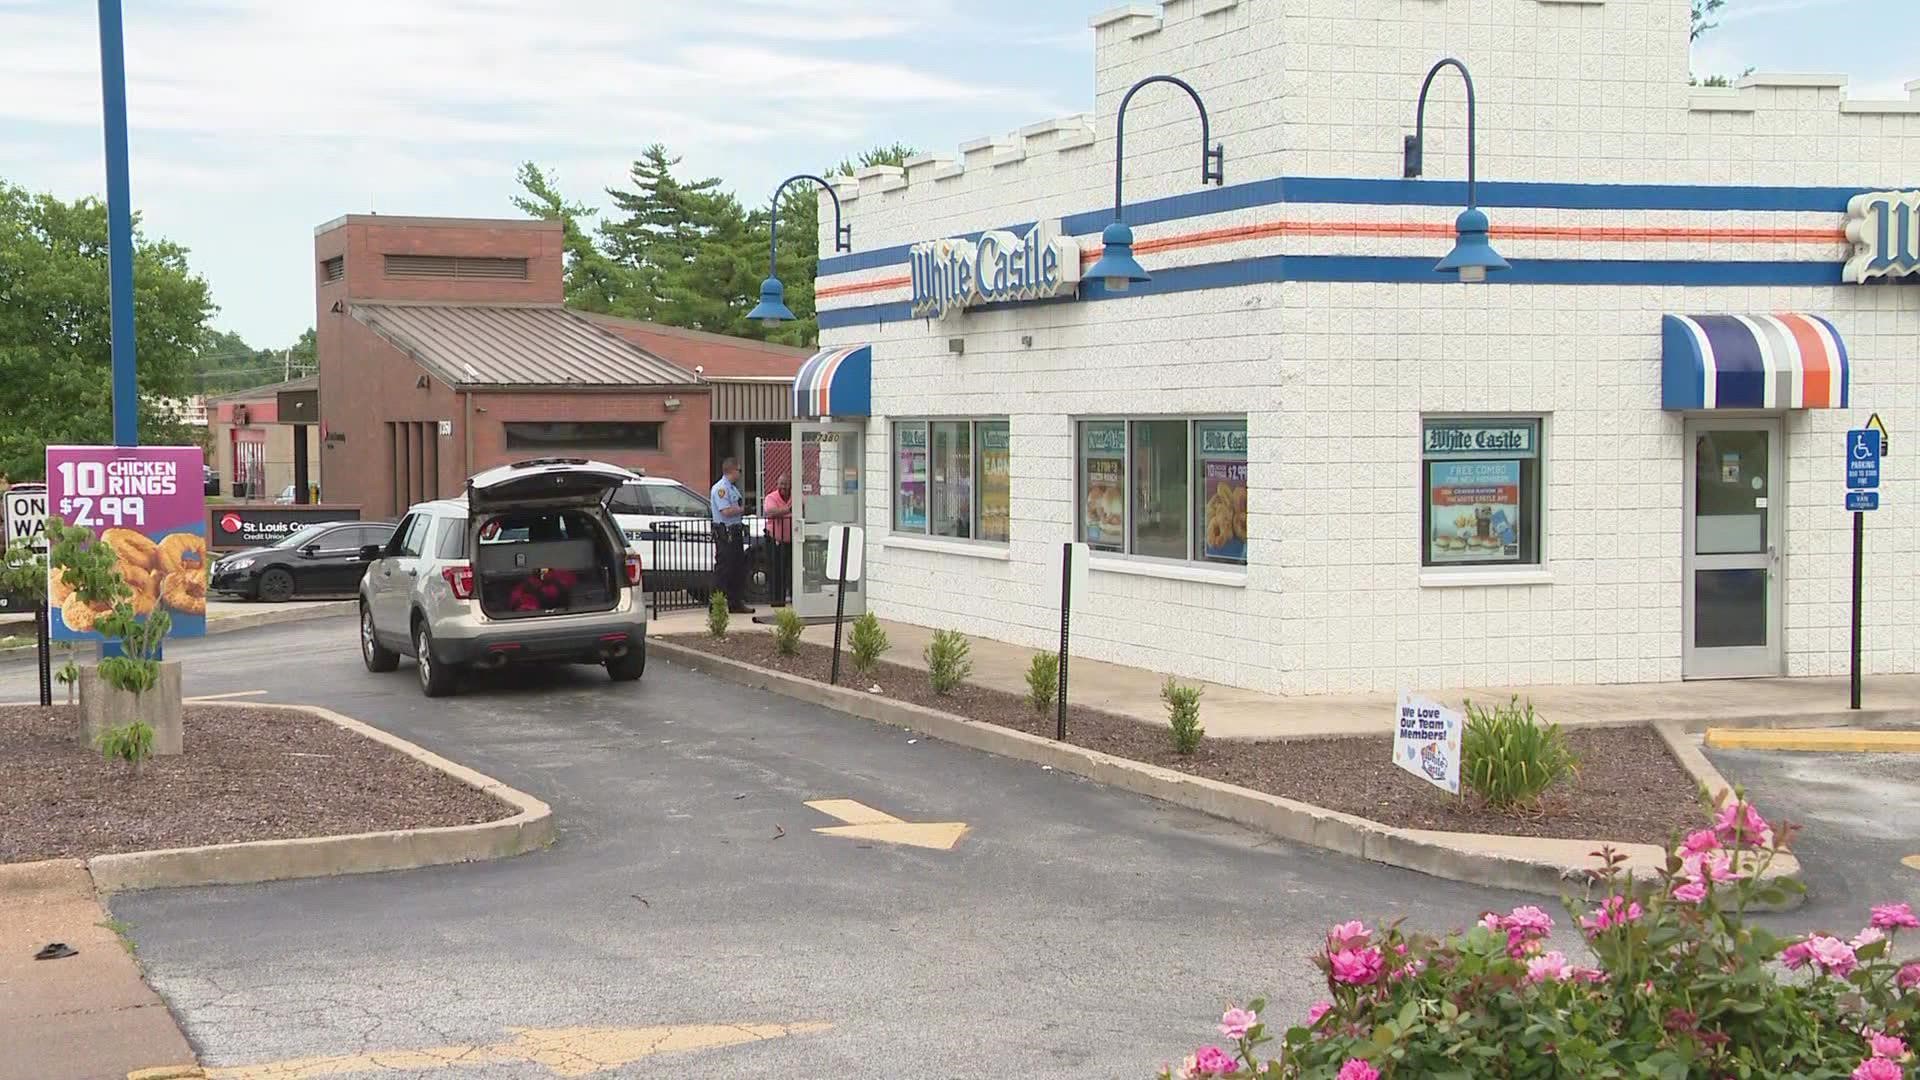 An employee at the restaurant said he was told a female co-worker was shot while at work.